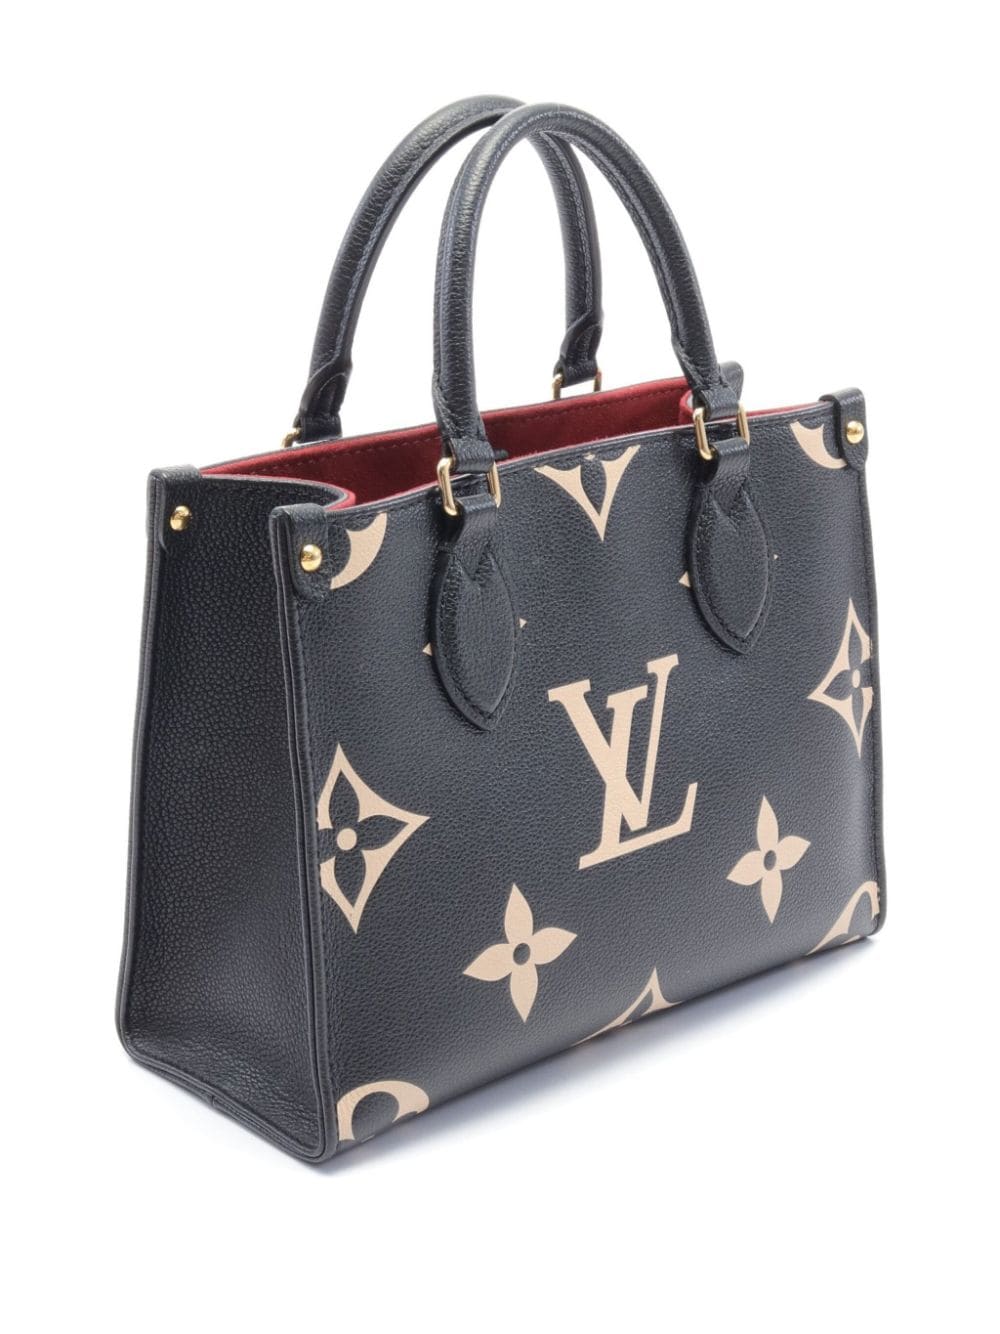 Pre-owned Louis Vuitton 2021 On The Go Pm Handbag In Black